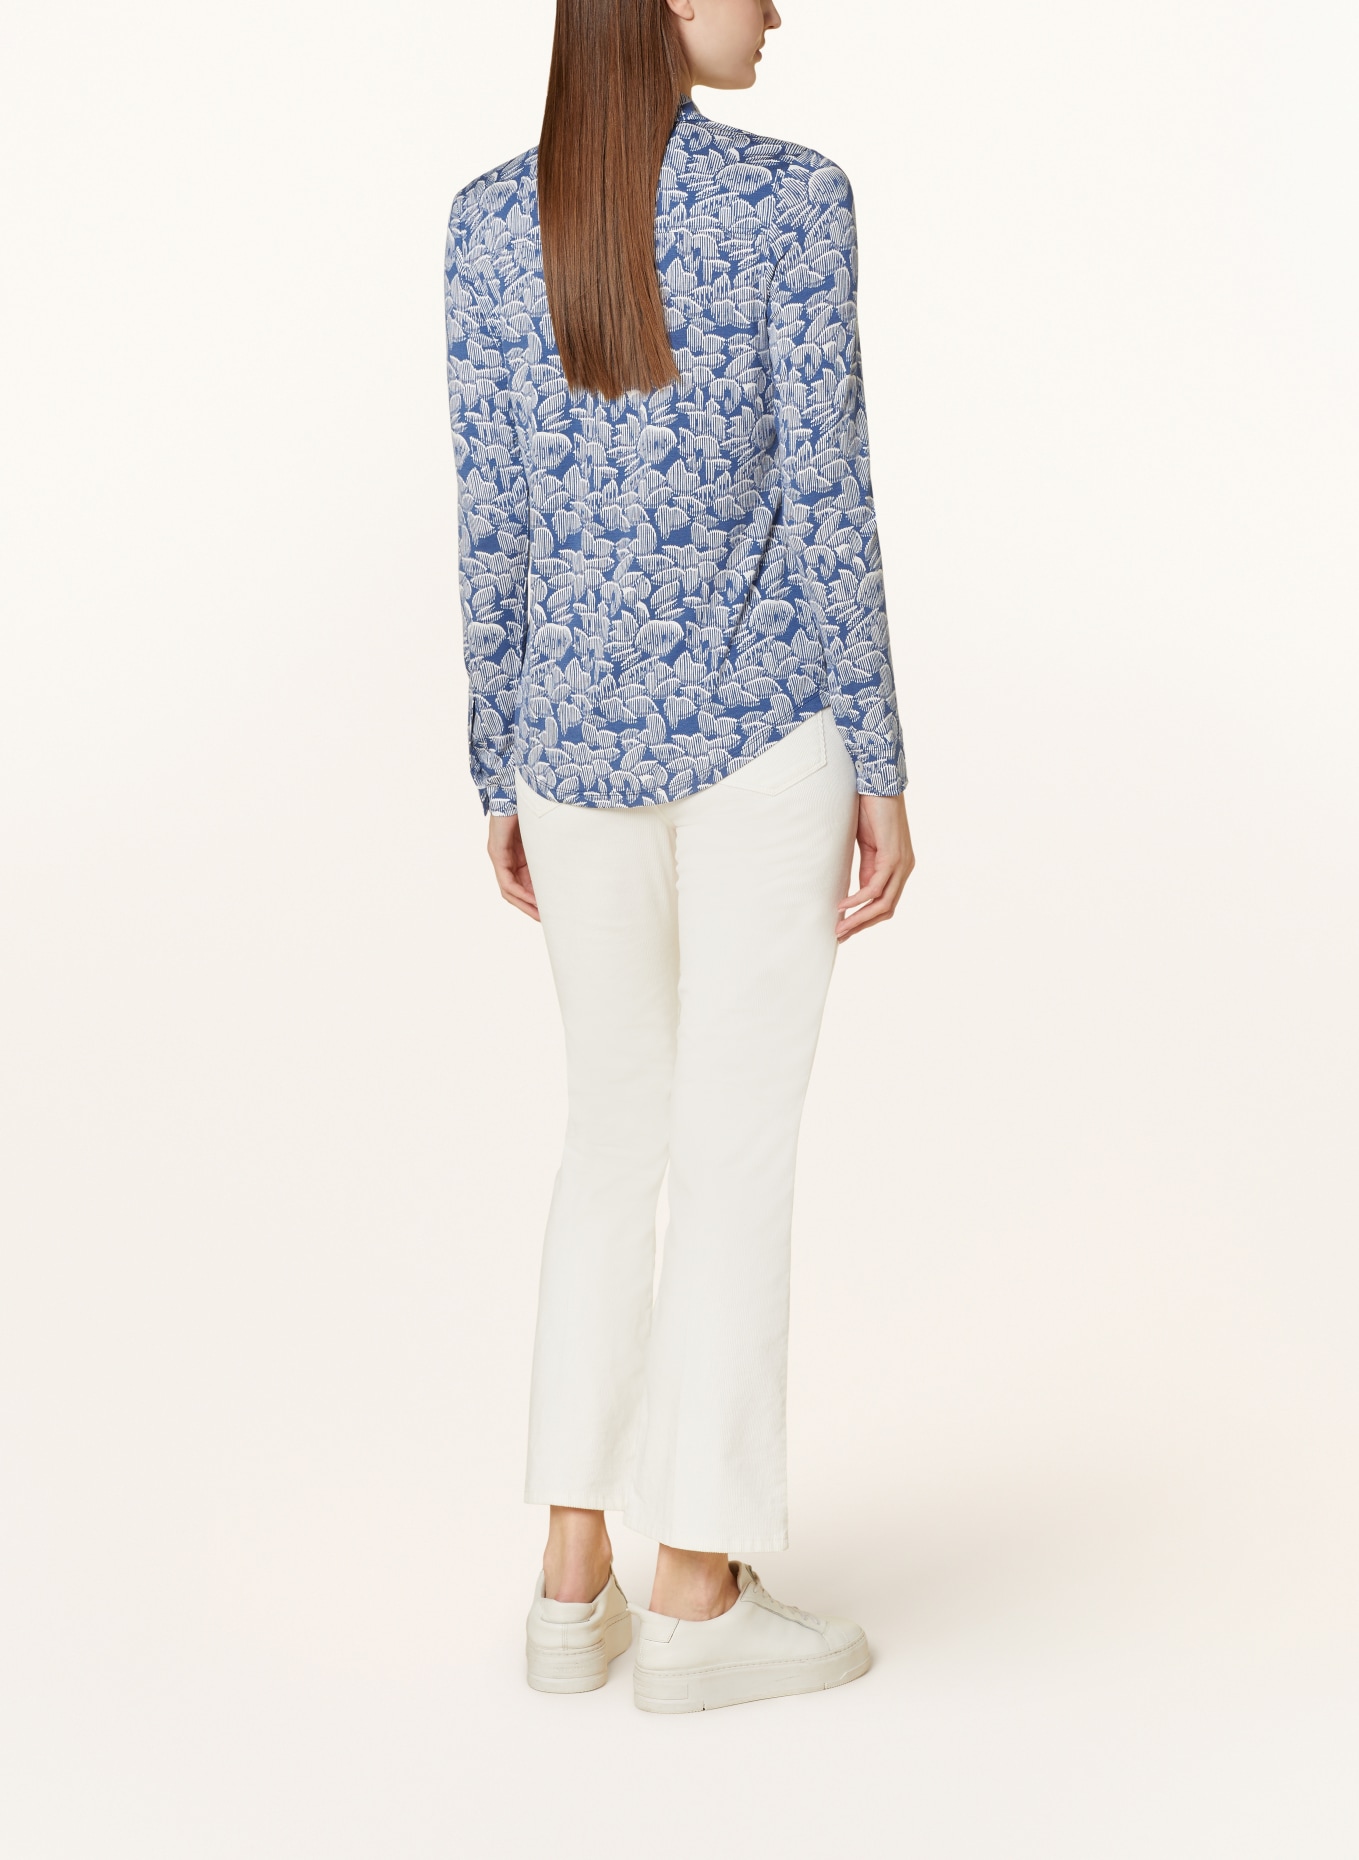 Marc O'Polo Shirt blouse made of jersey, Color: BLUE/ WHITE (Image 3)